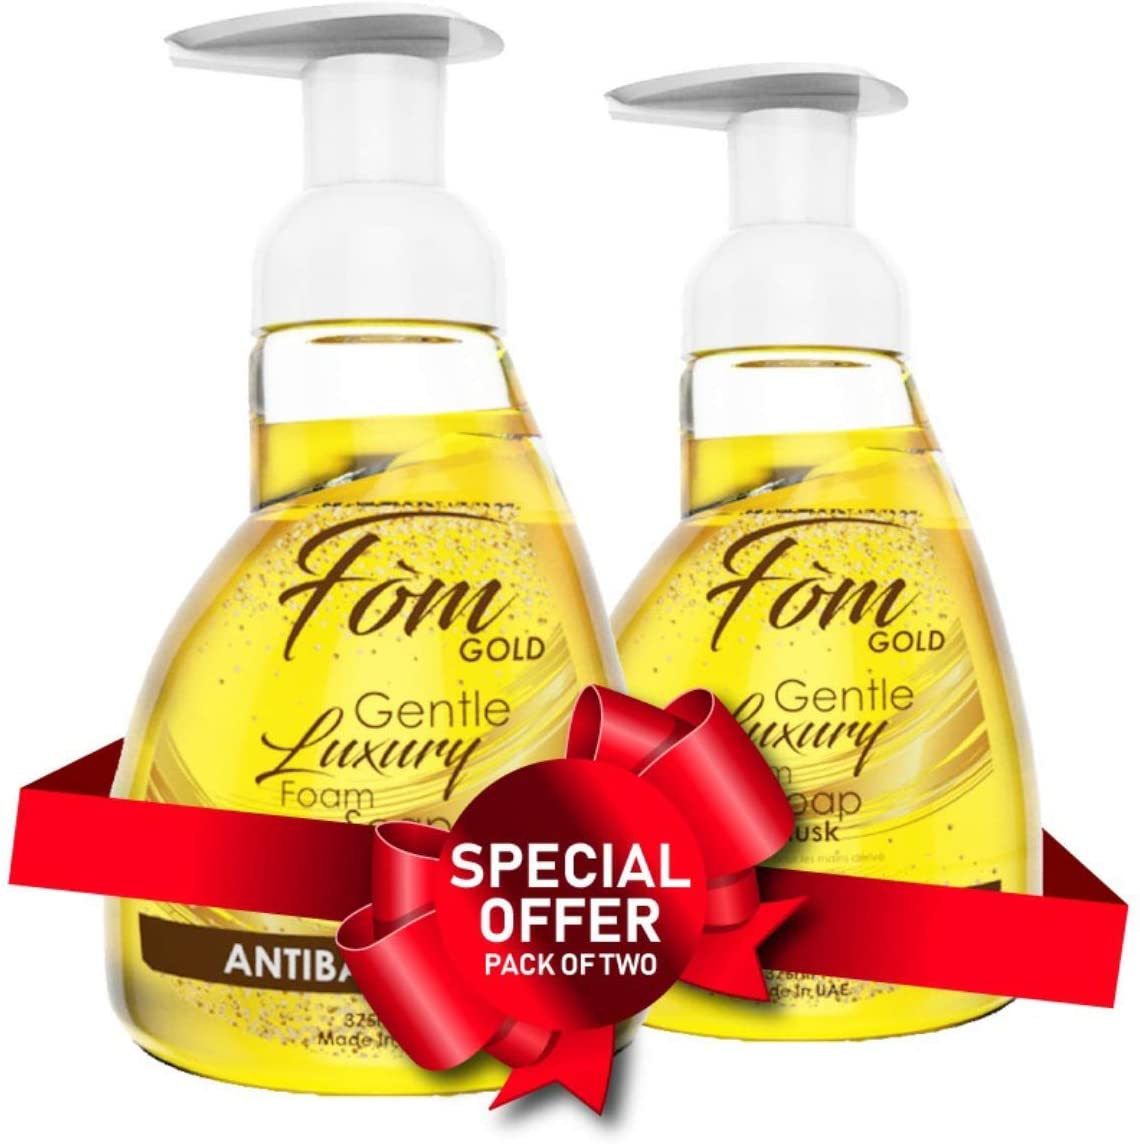 Fom Gold Luxury Foaming Hand Soap (Pack of 2 x 360ml) - Antibacterial